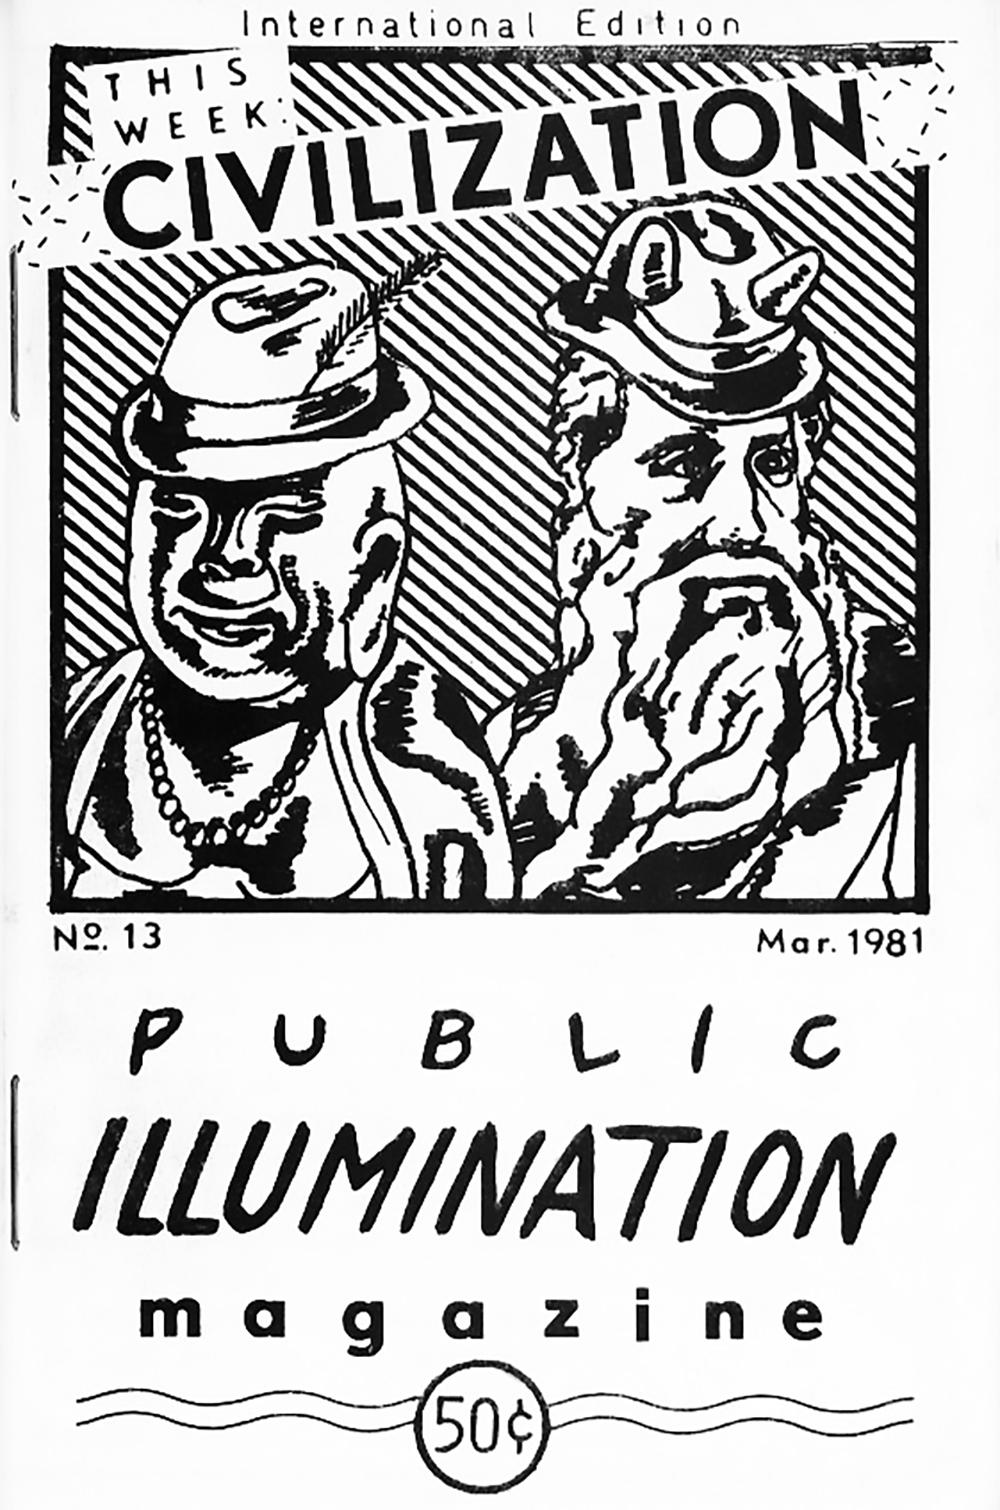 Keith Haring Public Illumination 1981:

A rare, highly collectible small pamphlet-style art magazine (measuring 4.25 x 2.75 inches), featuring a centerfold spread illustrated by Keith Haring, playfully credited under the moniker 